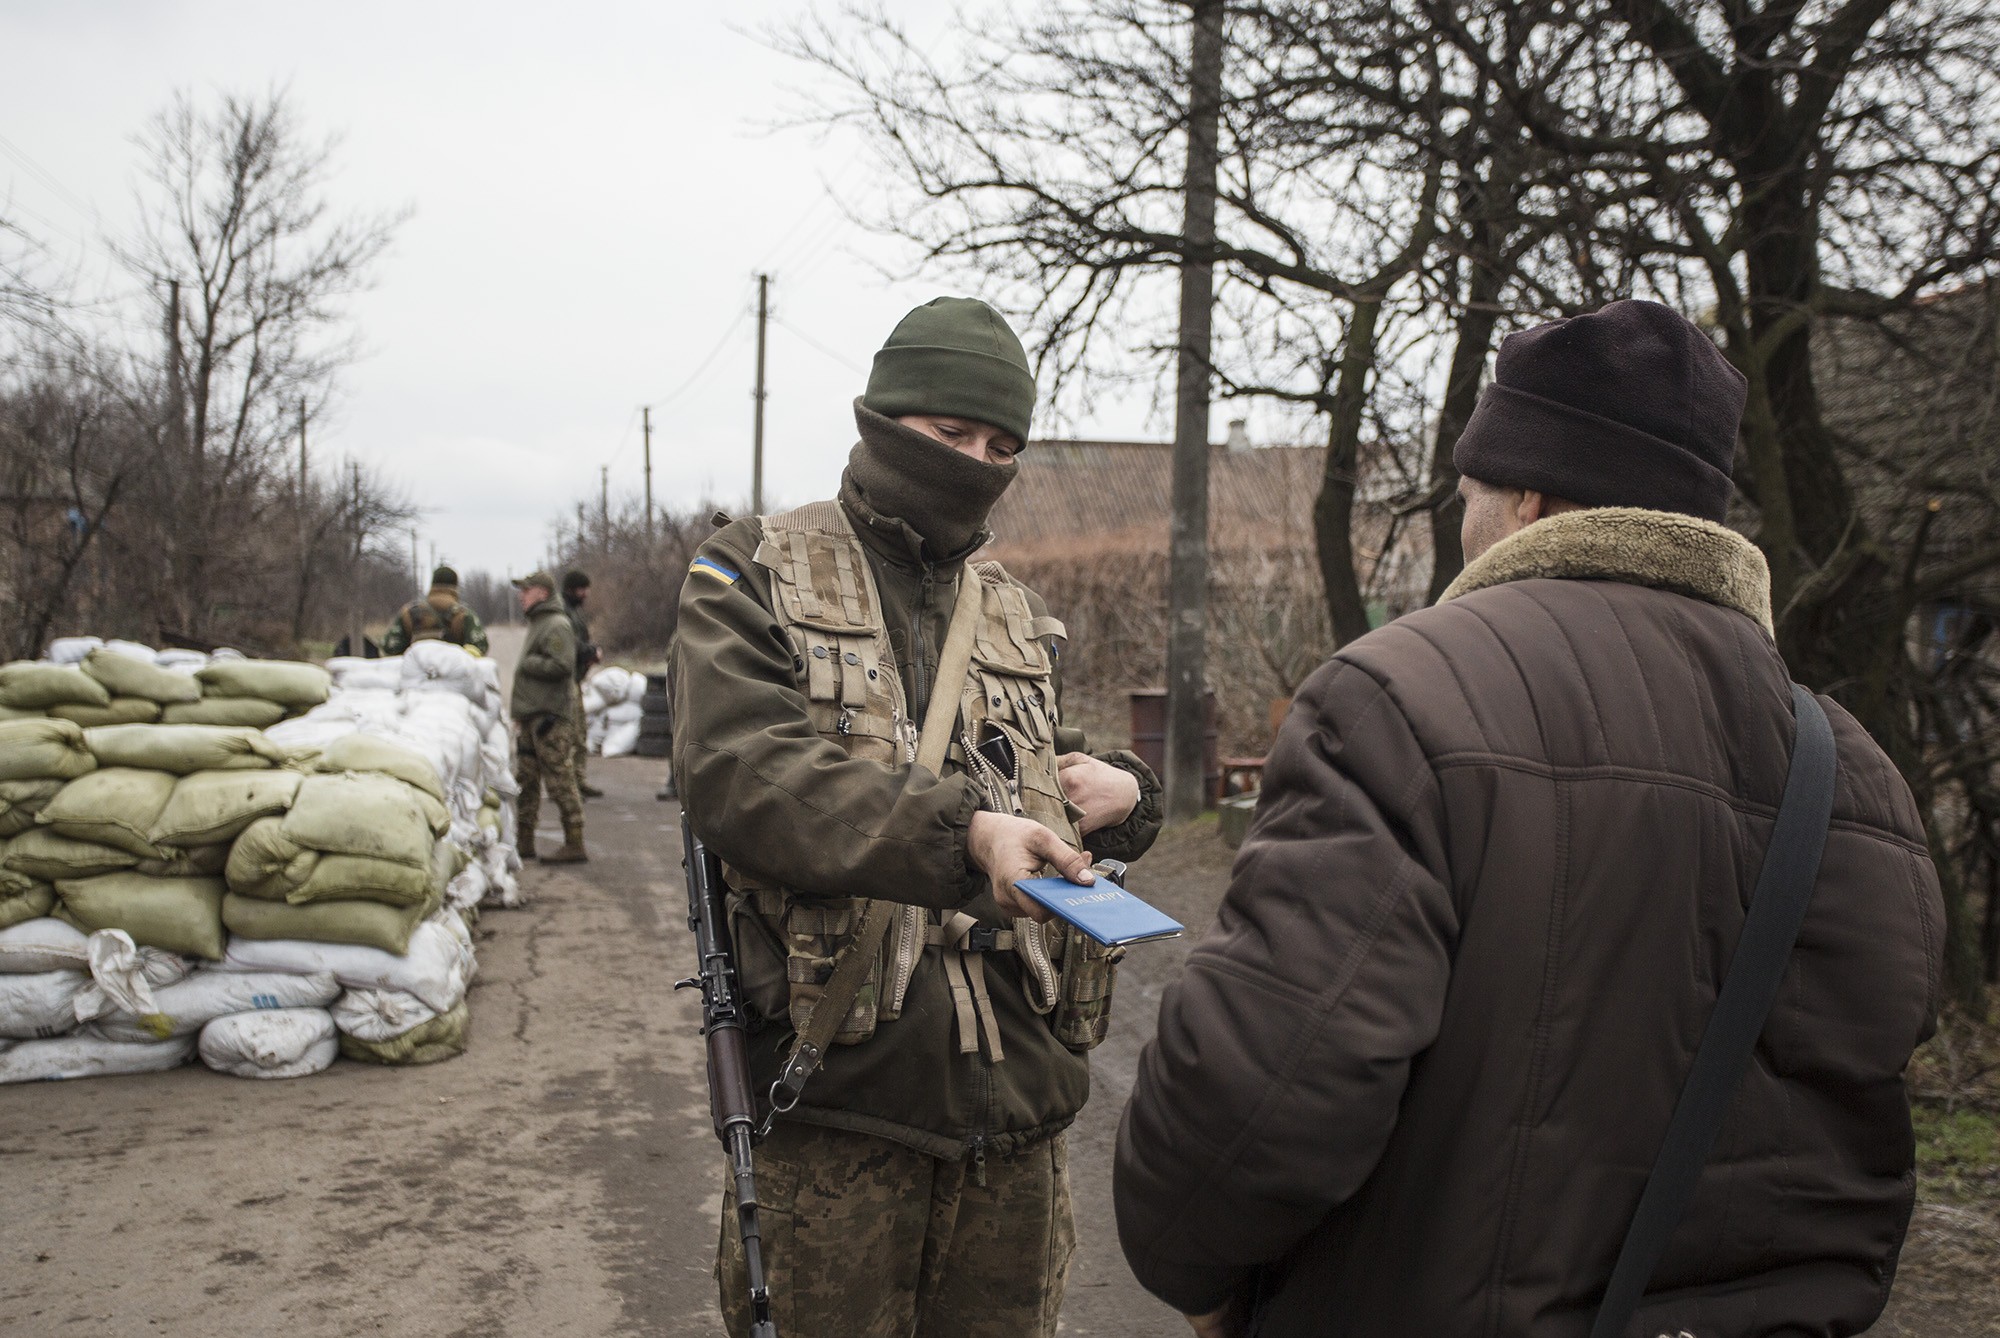 A Ukrainian soldier checks the passport of a man from Verkhniotoretske who is heading to the separatist-held zone on Nov. 29.